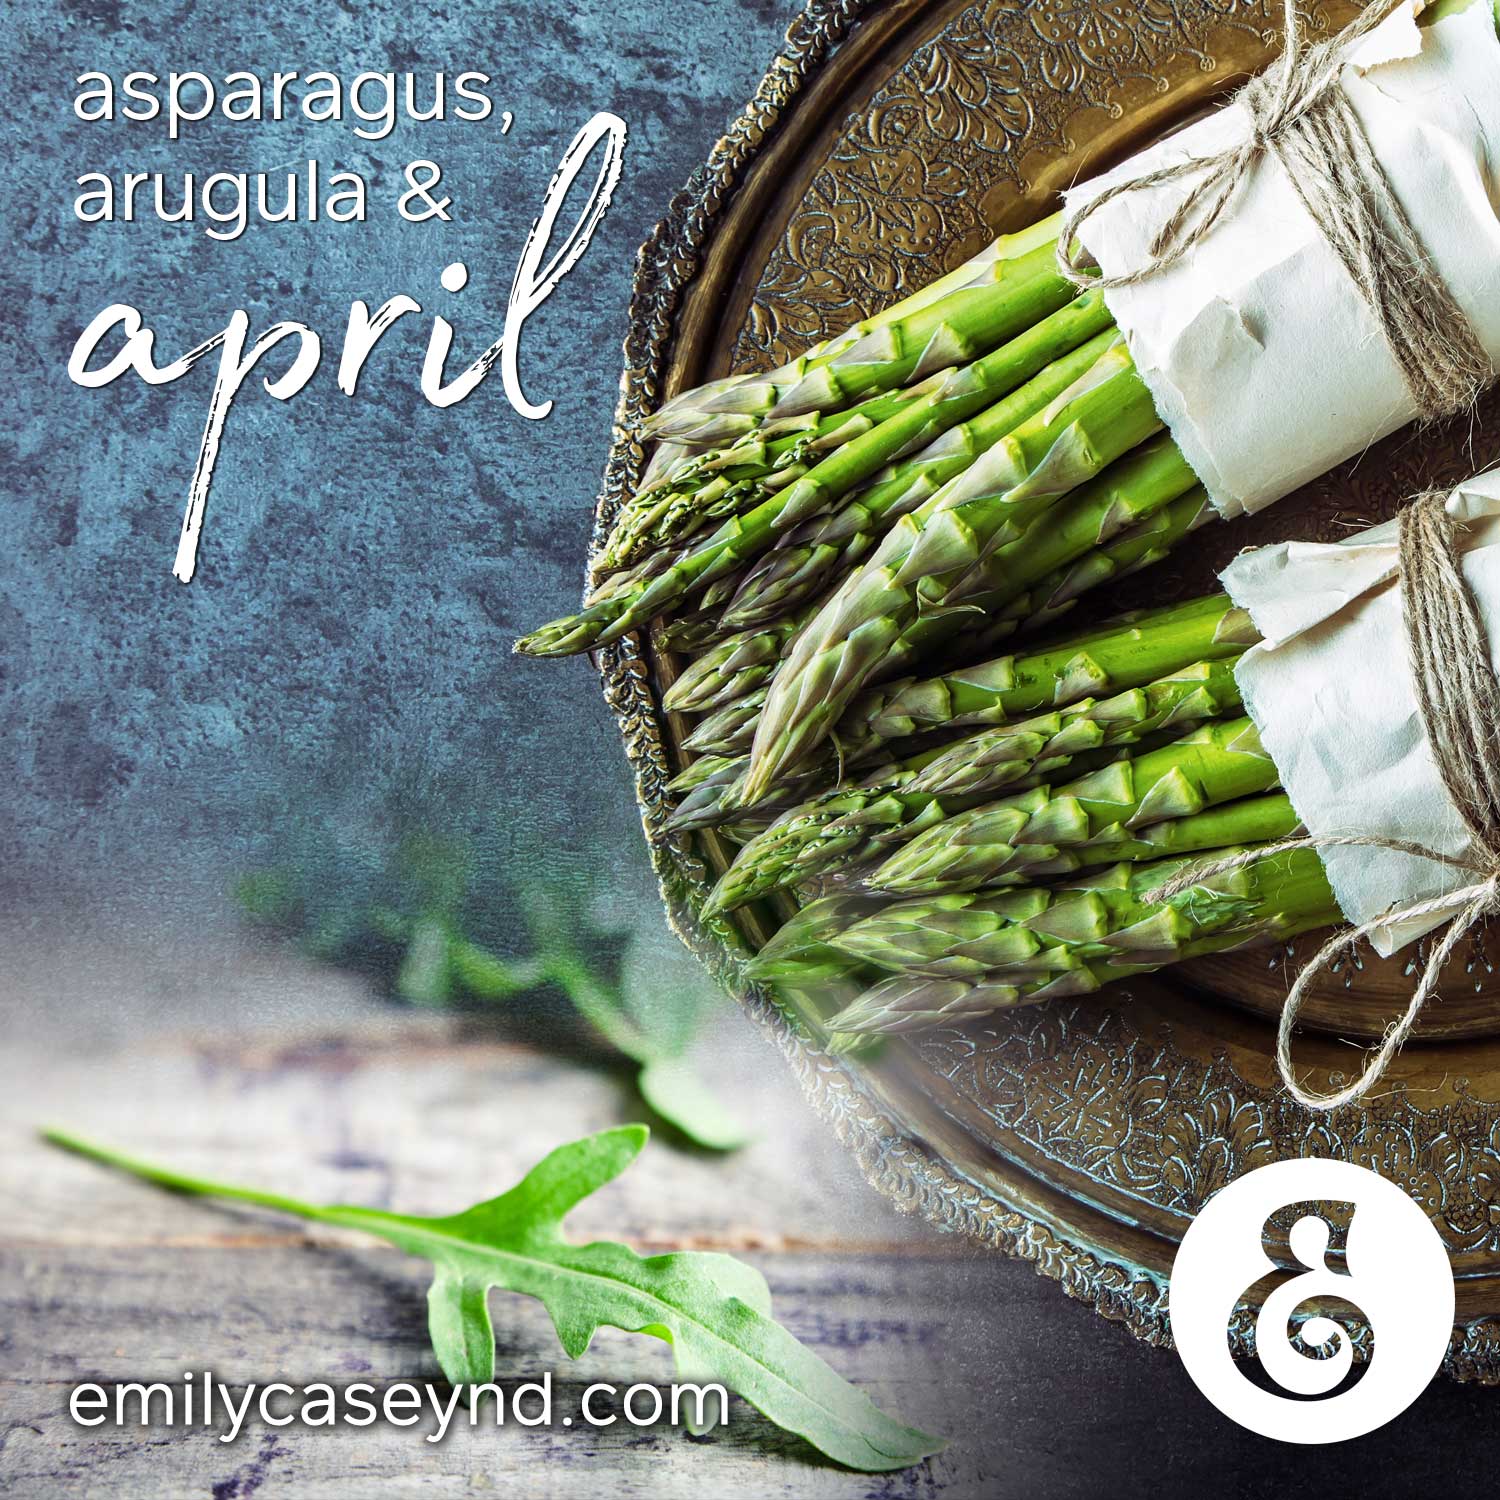 Year of Health 2017 - April is for asparagus & arugula